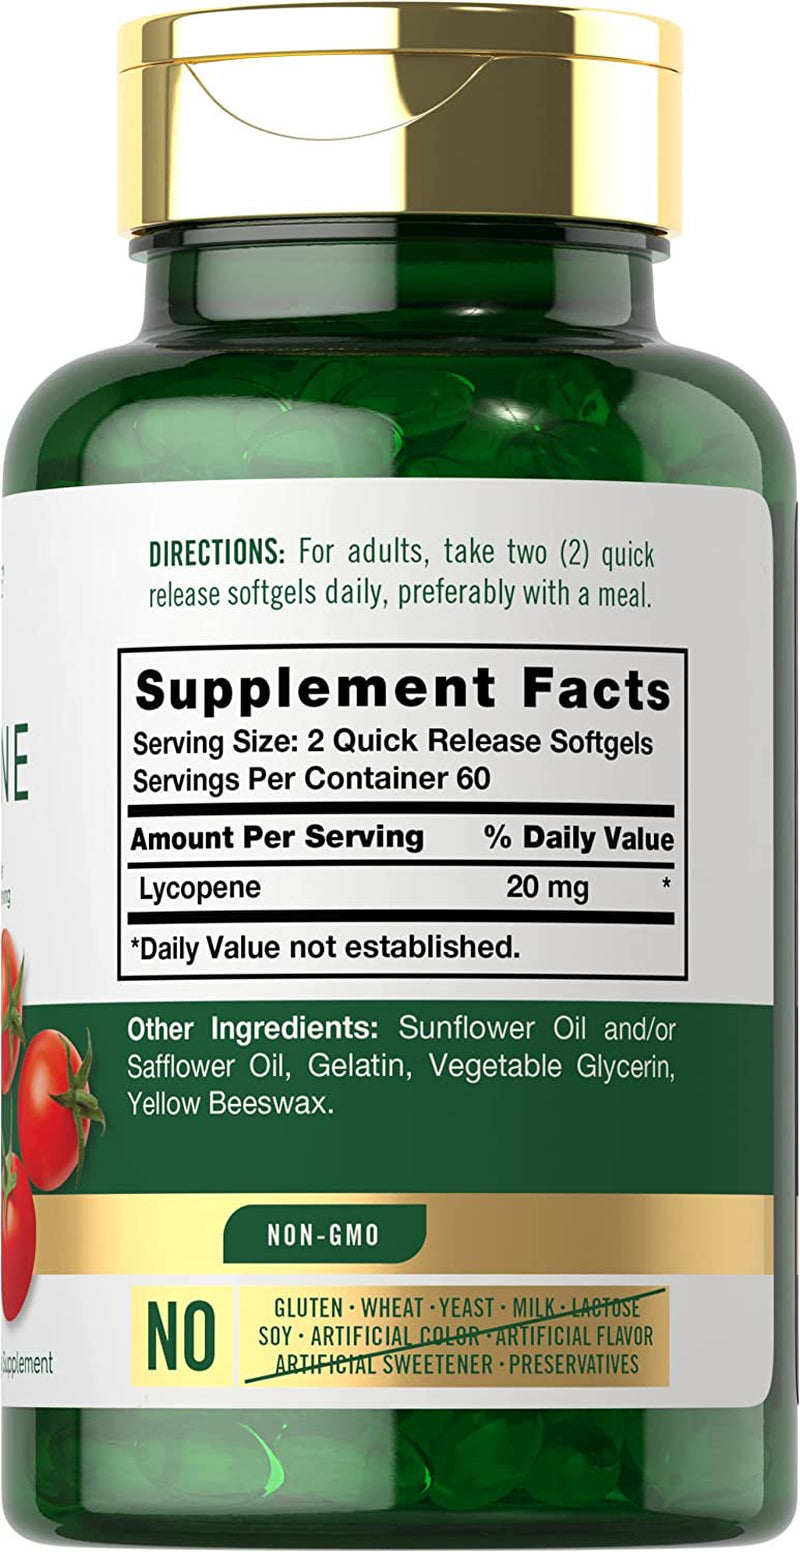 Lycopene | 20Mg | 120 Softgels | by Carlyle